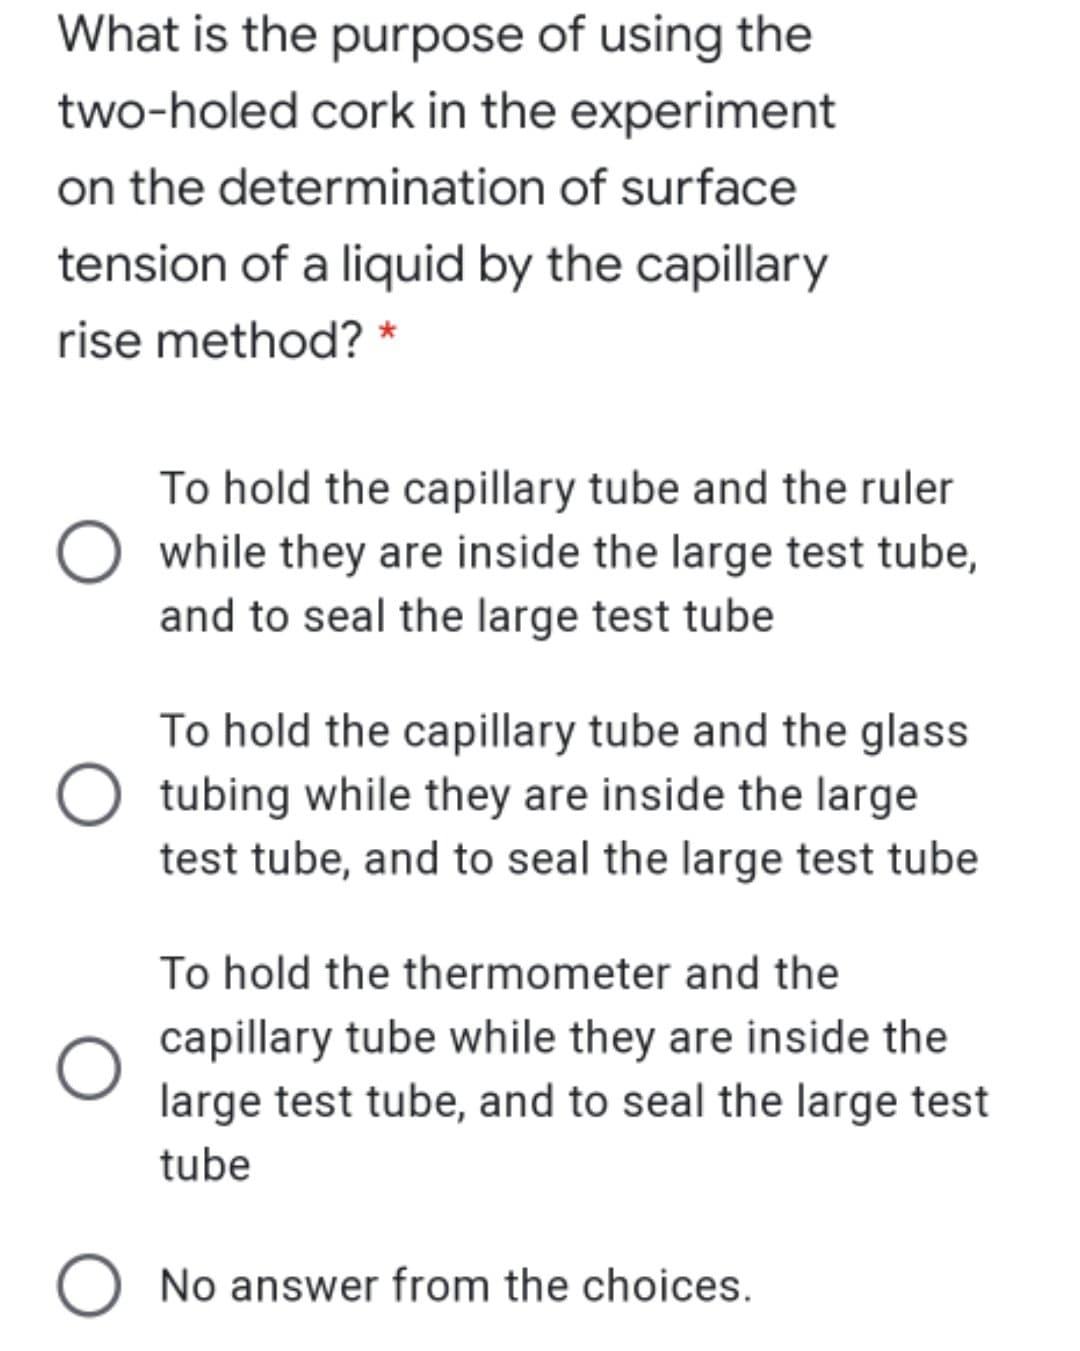 What is the purpose of using the
two-holed cork in the experiment
on the determination of surface
tension of a liquid by the capillary
rise method? *
To hold the capillary tube and the ruler
while they are inside the large test tube,
and to seal the large test tube
To hold the capillary tube and the glass
tubing while they are inside the large
test tube, and to seal the large test tube
To hold the thermometer and the
capillary tube while they are inside the
large test tube, and to seal the large test
tube
O No answer from the choices.
